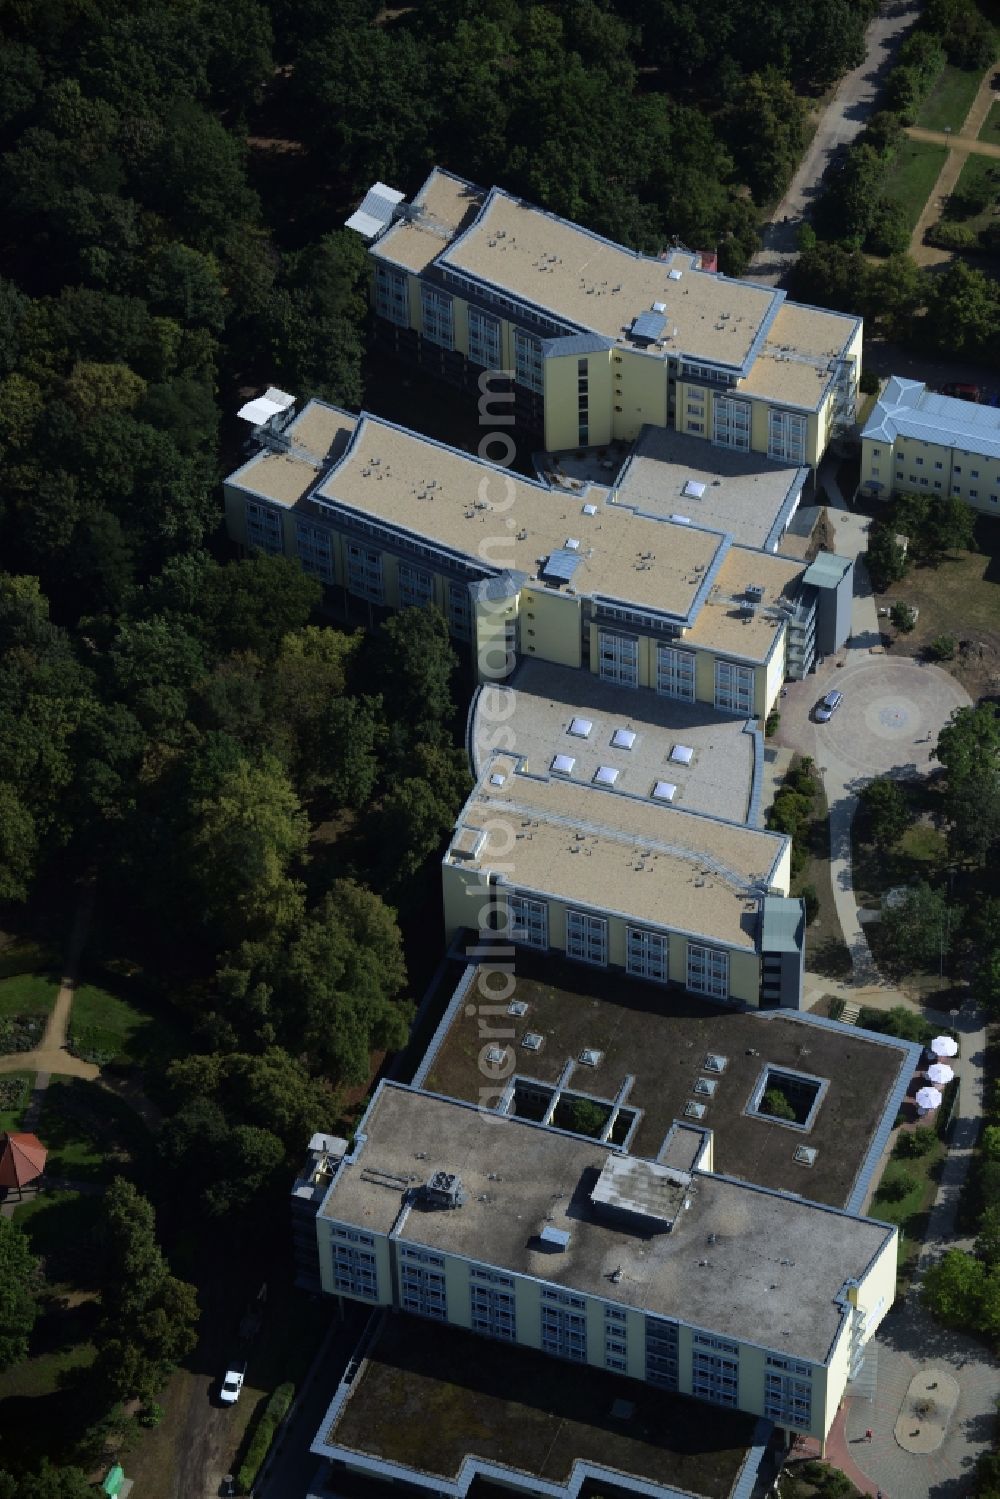 Bad Düben from above - Hospital grounds of the rehabilitation center of the clinic MediClin Waldkrankenhaus in Bad Dueben in the state of Saxony. The building complex and compound is located on Kur Park in the centre of the town